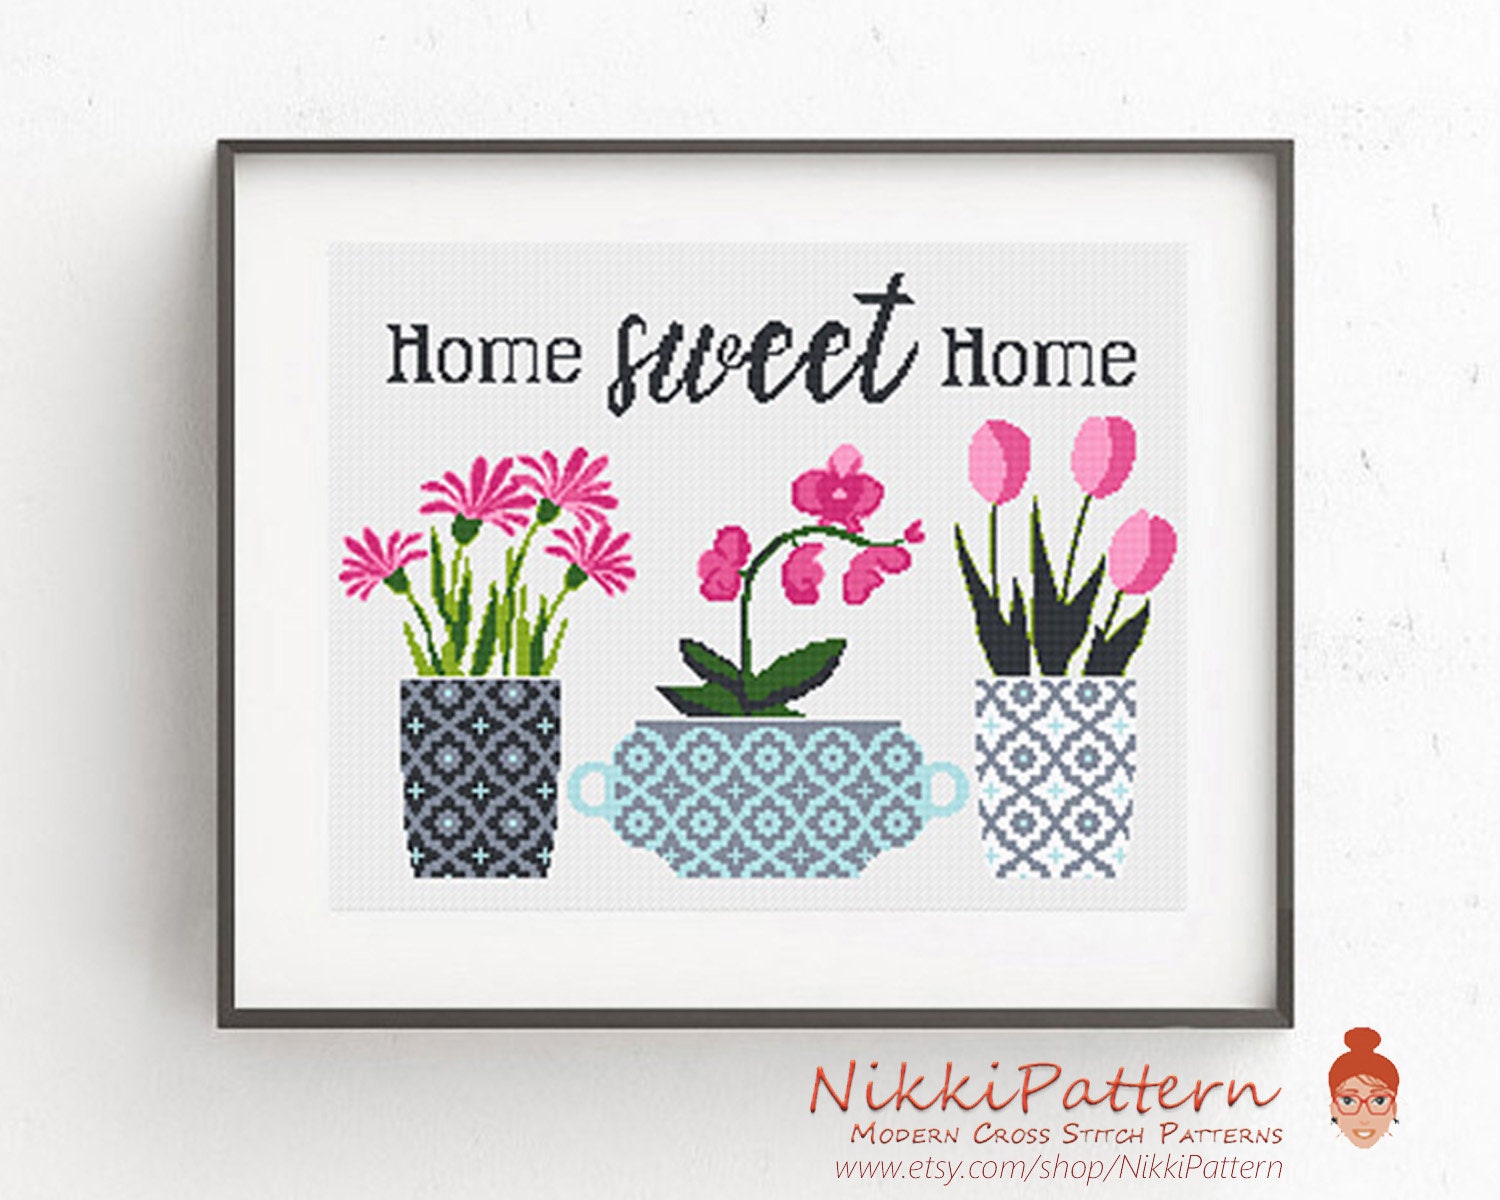 Home Decor Diy Crafts Download Embroidery Pattern PDF Cross Stitch Letters Yes You Can Quote Cross Stitch Pattern Inspired Pattern